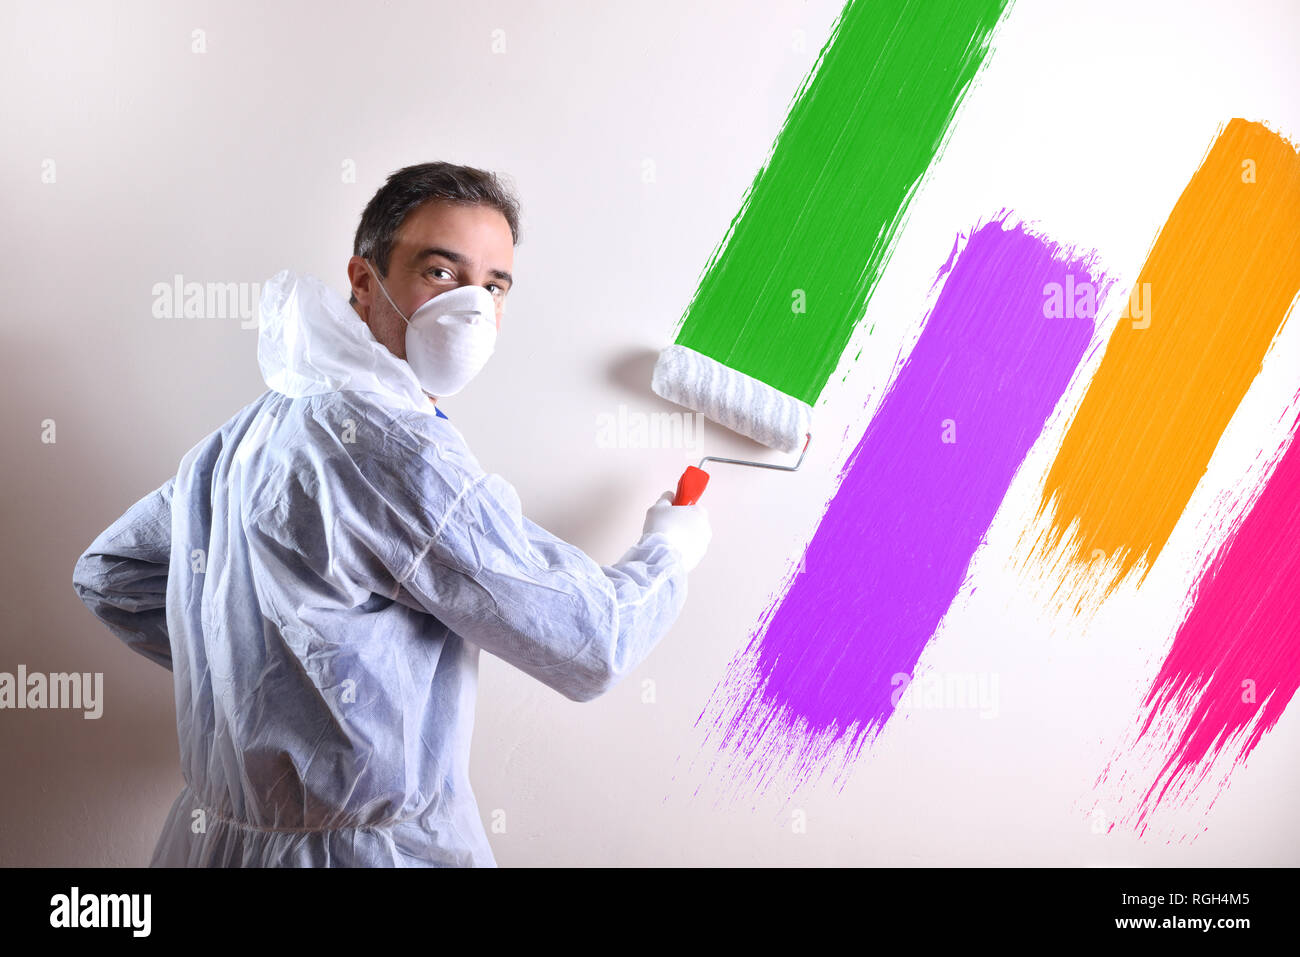 Background with professional painter with working overalls and roller on the back of a white wall painted with four colors. Horizontal composition. Stock Photo